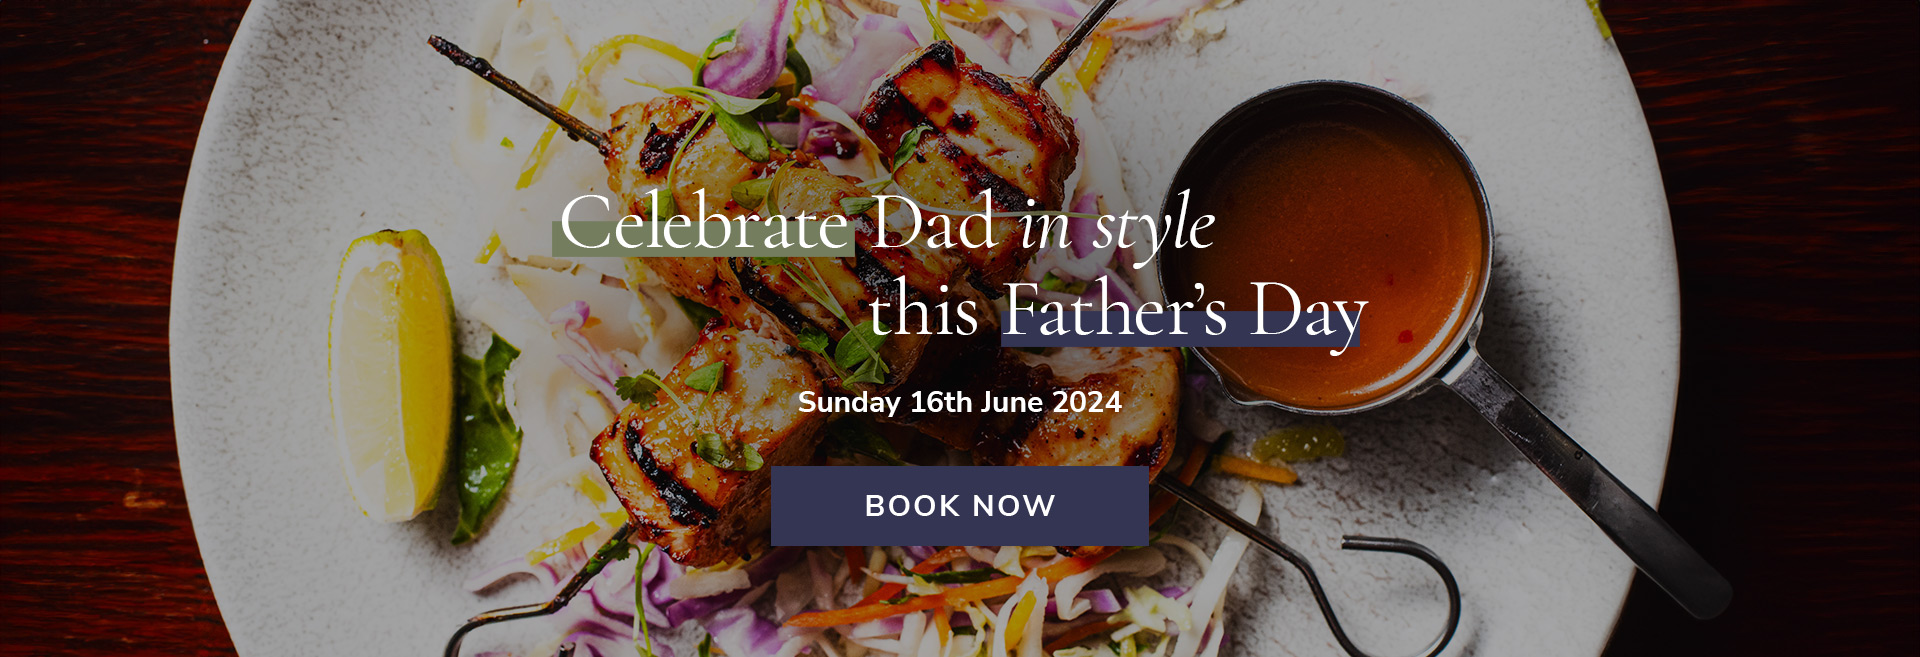 Father's Day at Crown & Greyhound